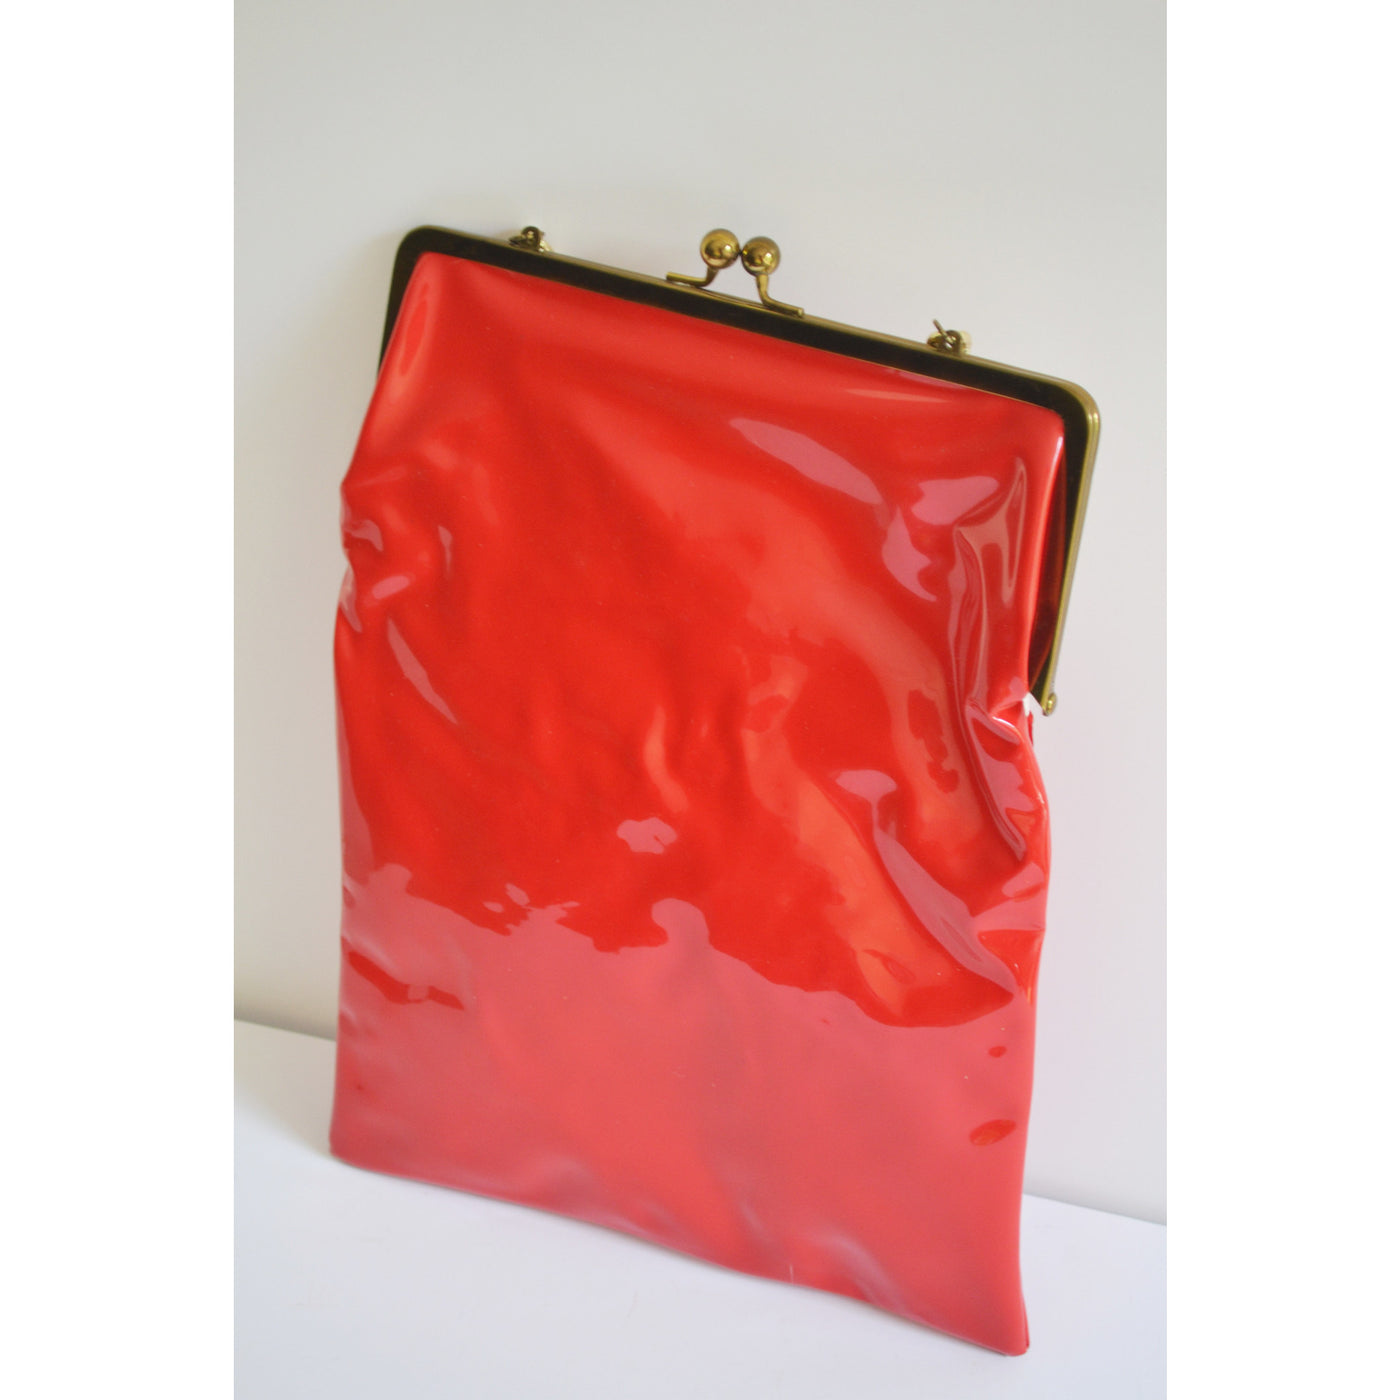 Vintage Red & White Plastic Purse By Tyrolean 